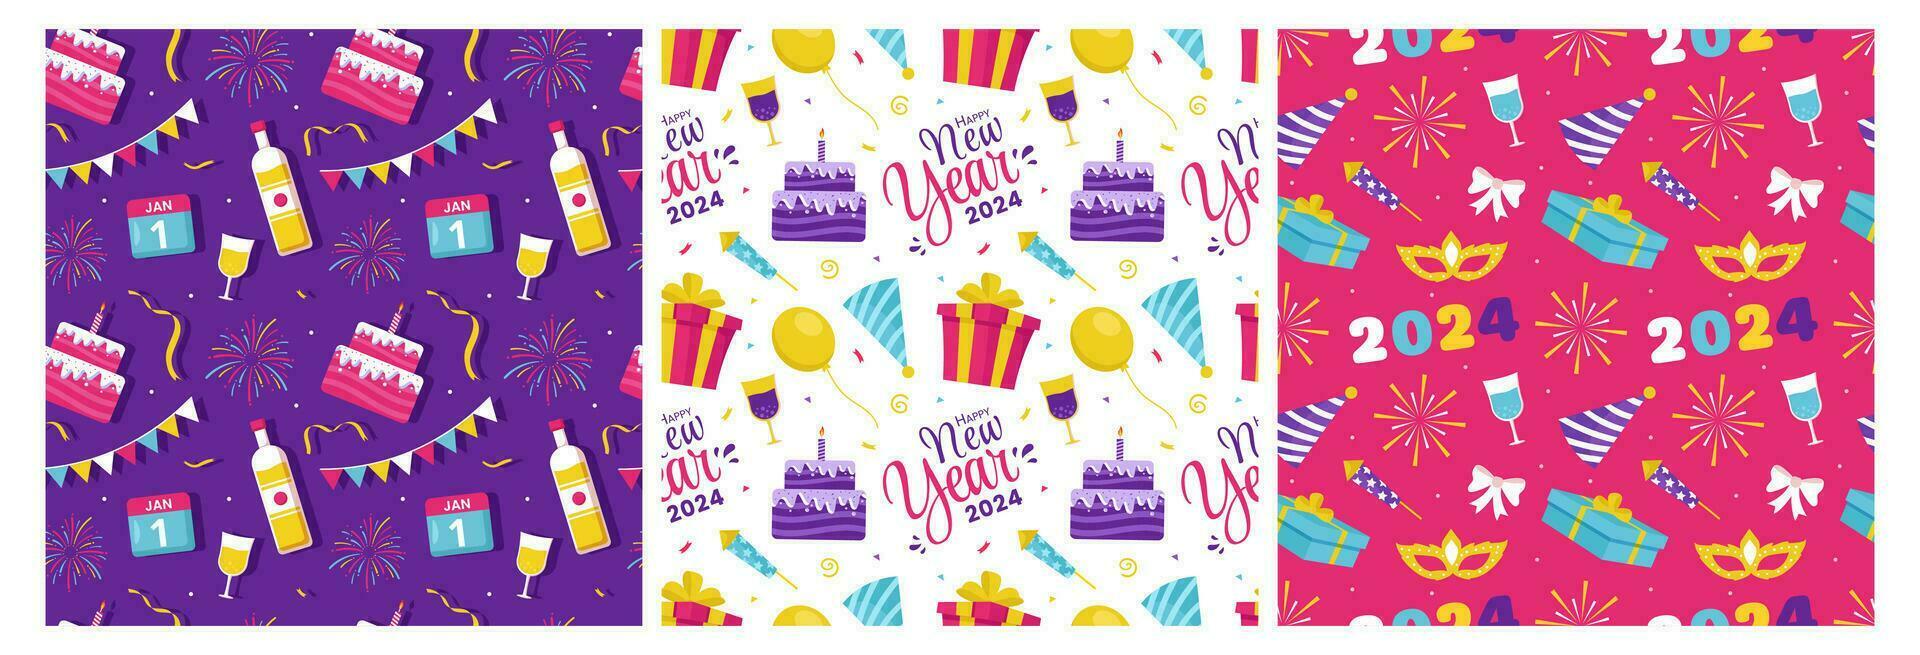 Set of Happy New Year 2024 Seamless Pattern Illustration with Elements New Years Background Design vector